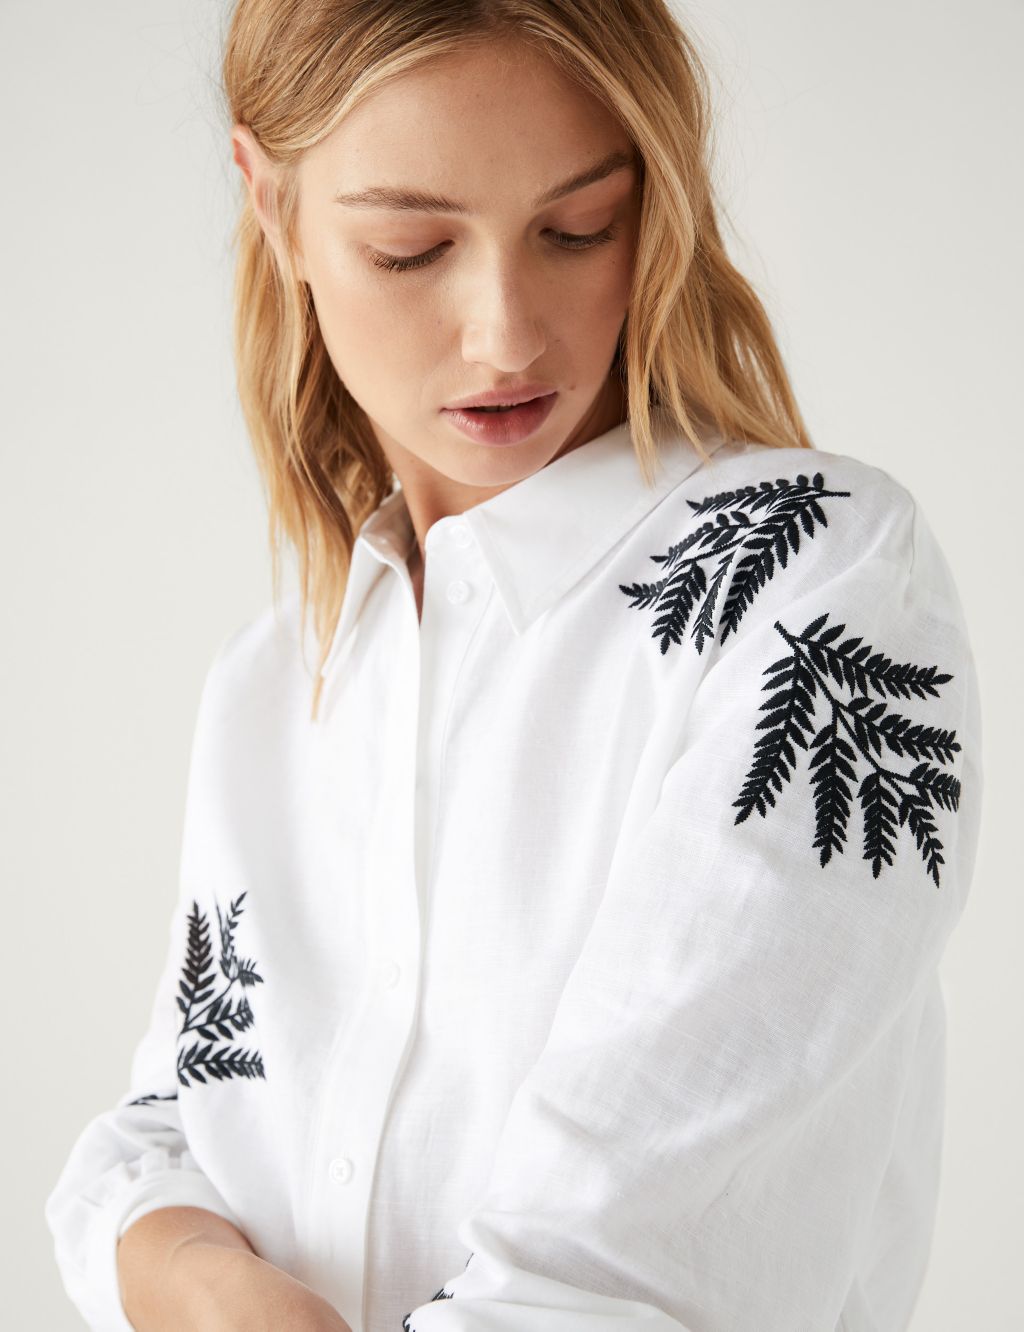 Linen Rich Embroidered Collared Shirt image 2